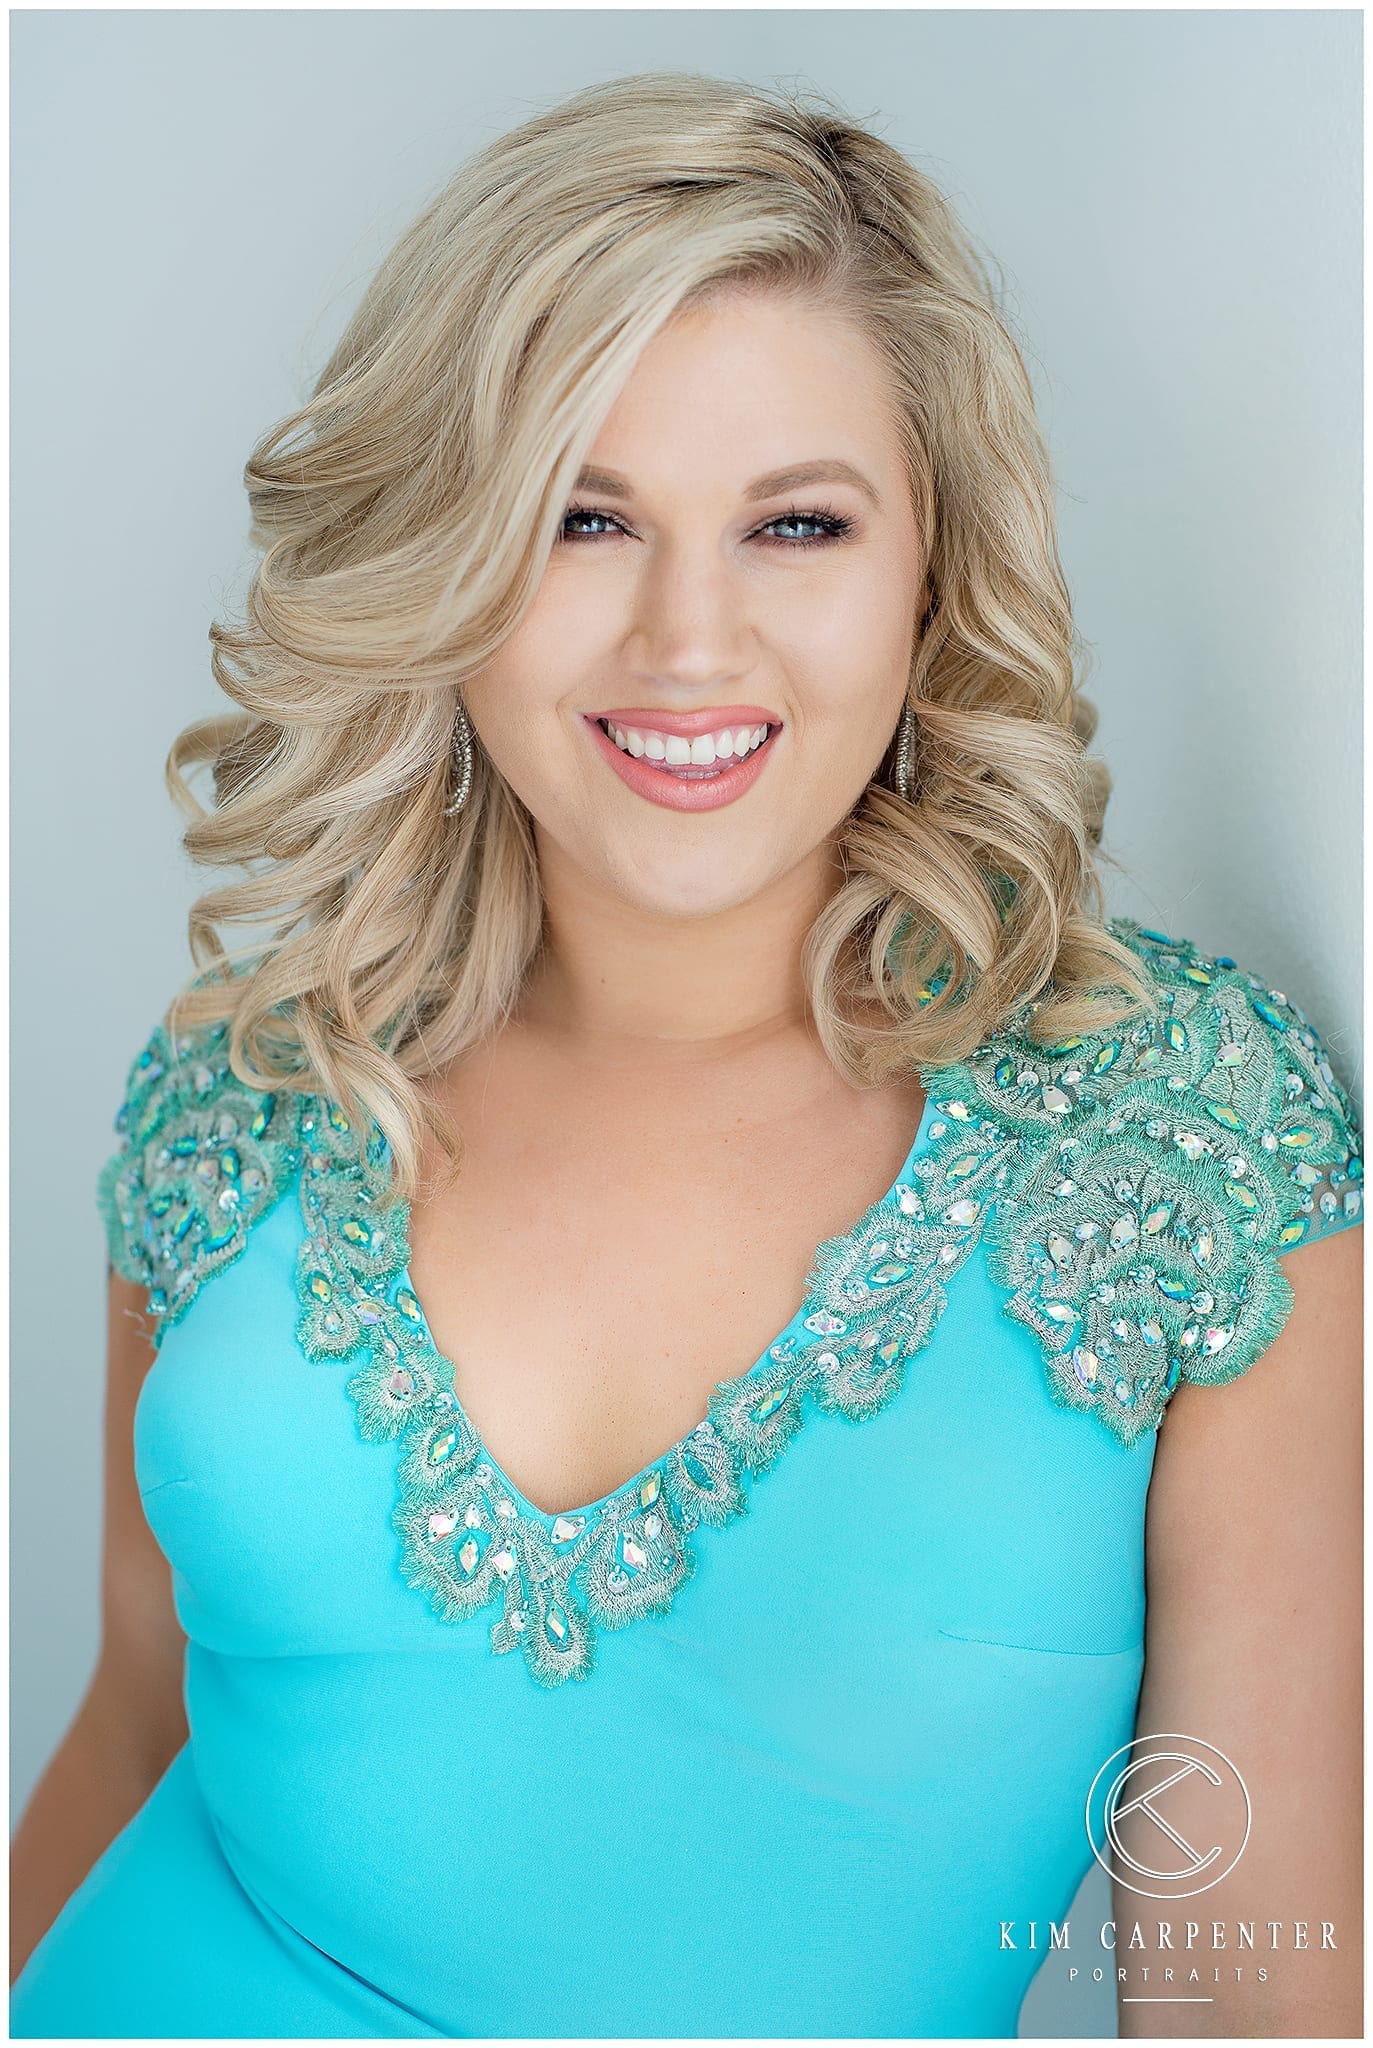 Woman smiling and posing for camera with blonde curls and a blue dress. Lakeland Photographer, professional headshots